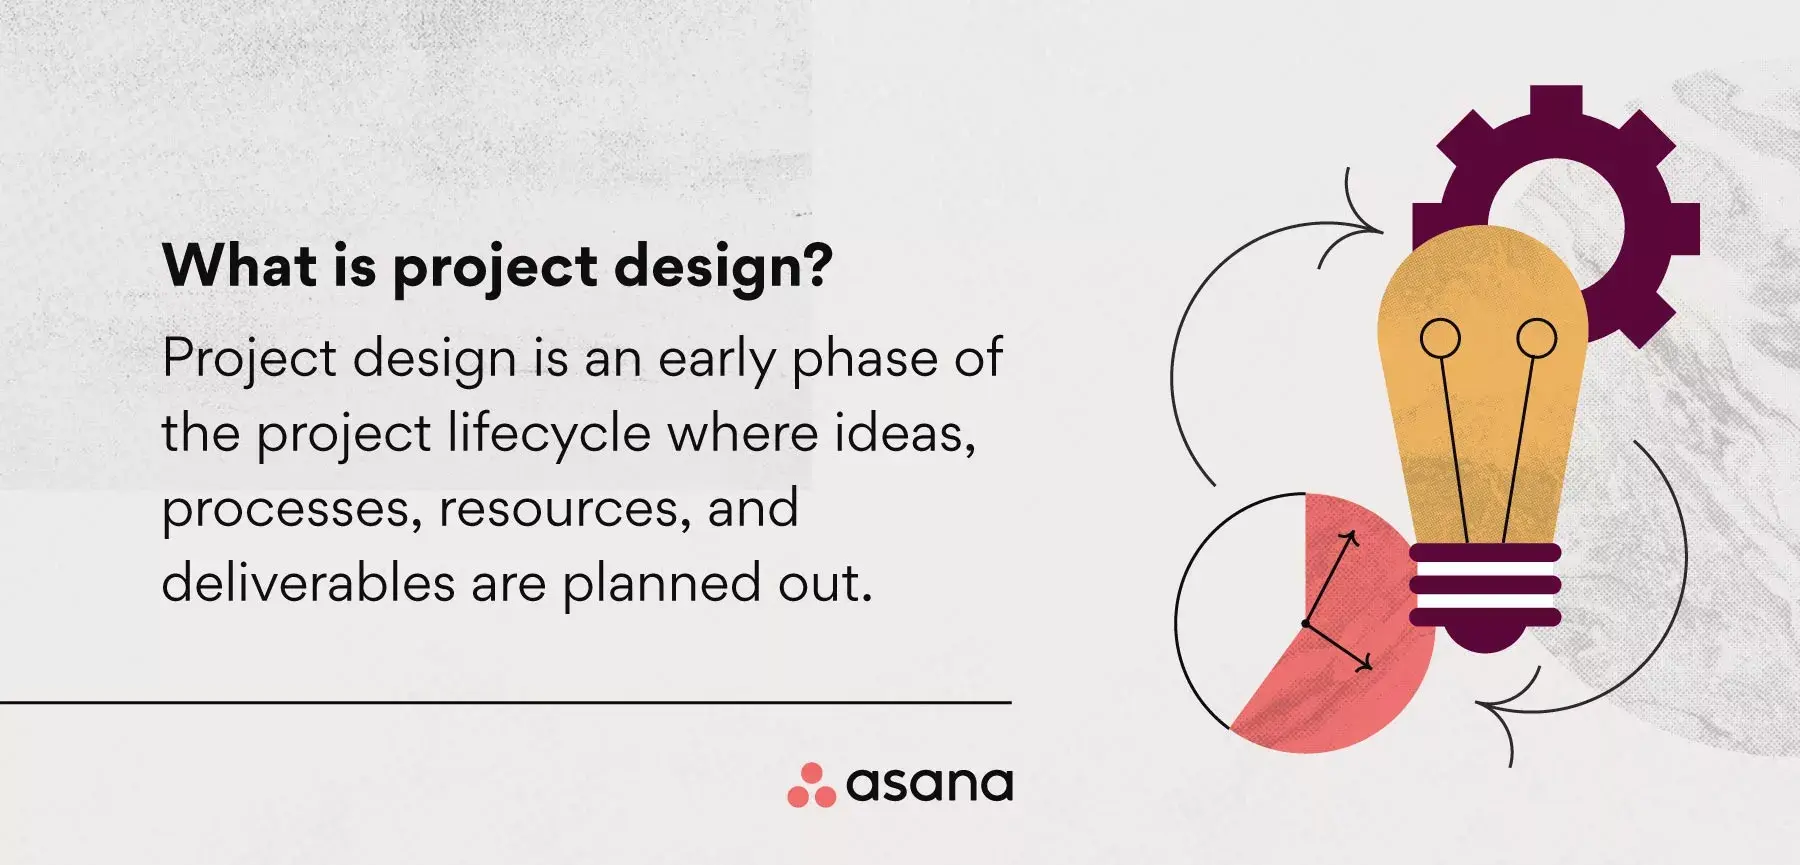 What is project design?